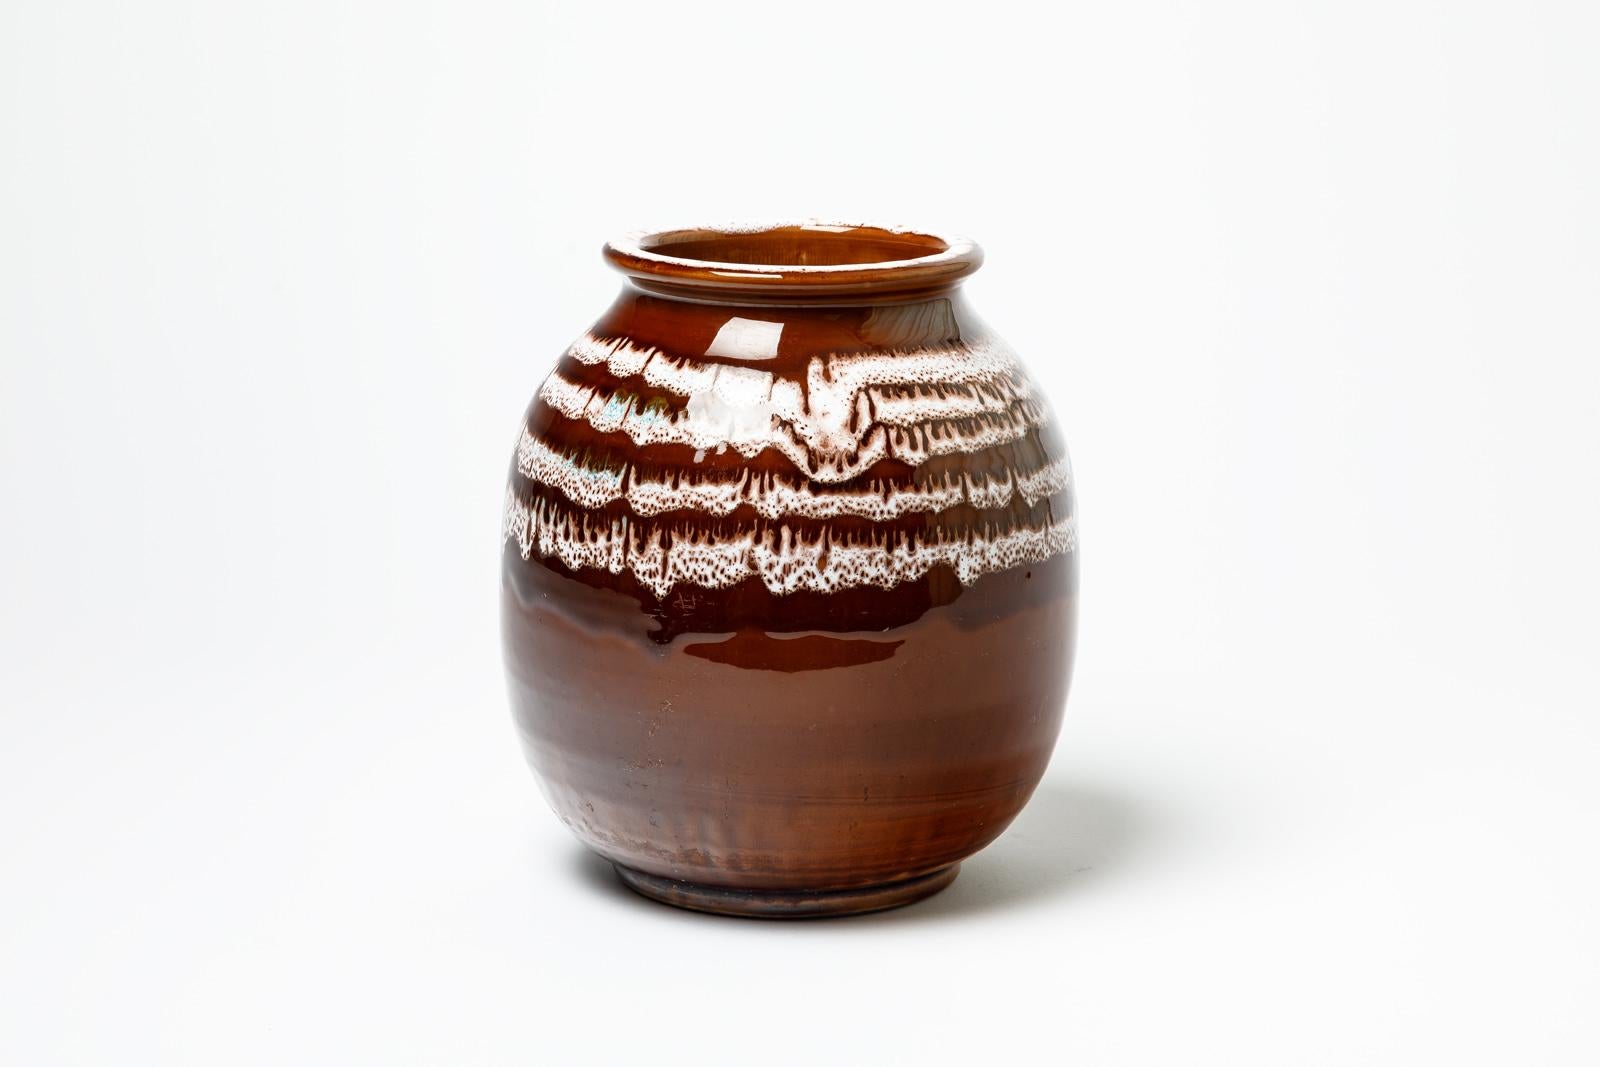 Brown and white  glazed stoneware vase by Jean Besnard.
Artist signature under the base. 
Circa 1930.
H : 8.7’ x 6.3’ inches.
